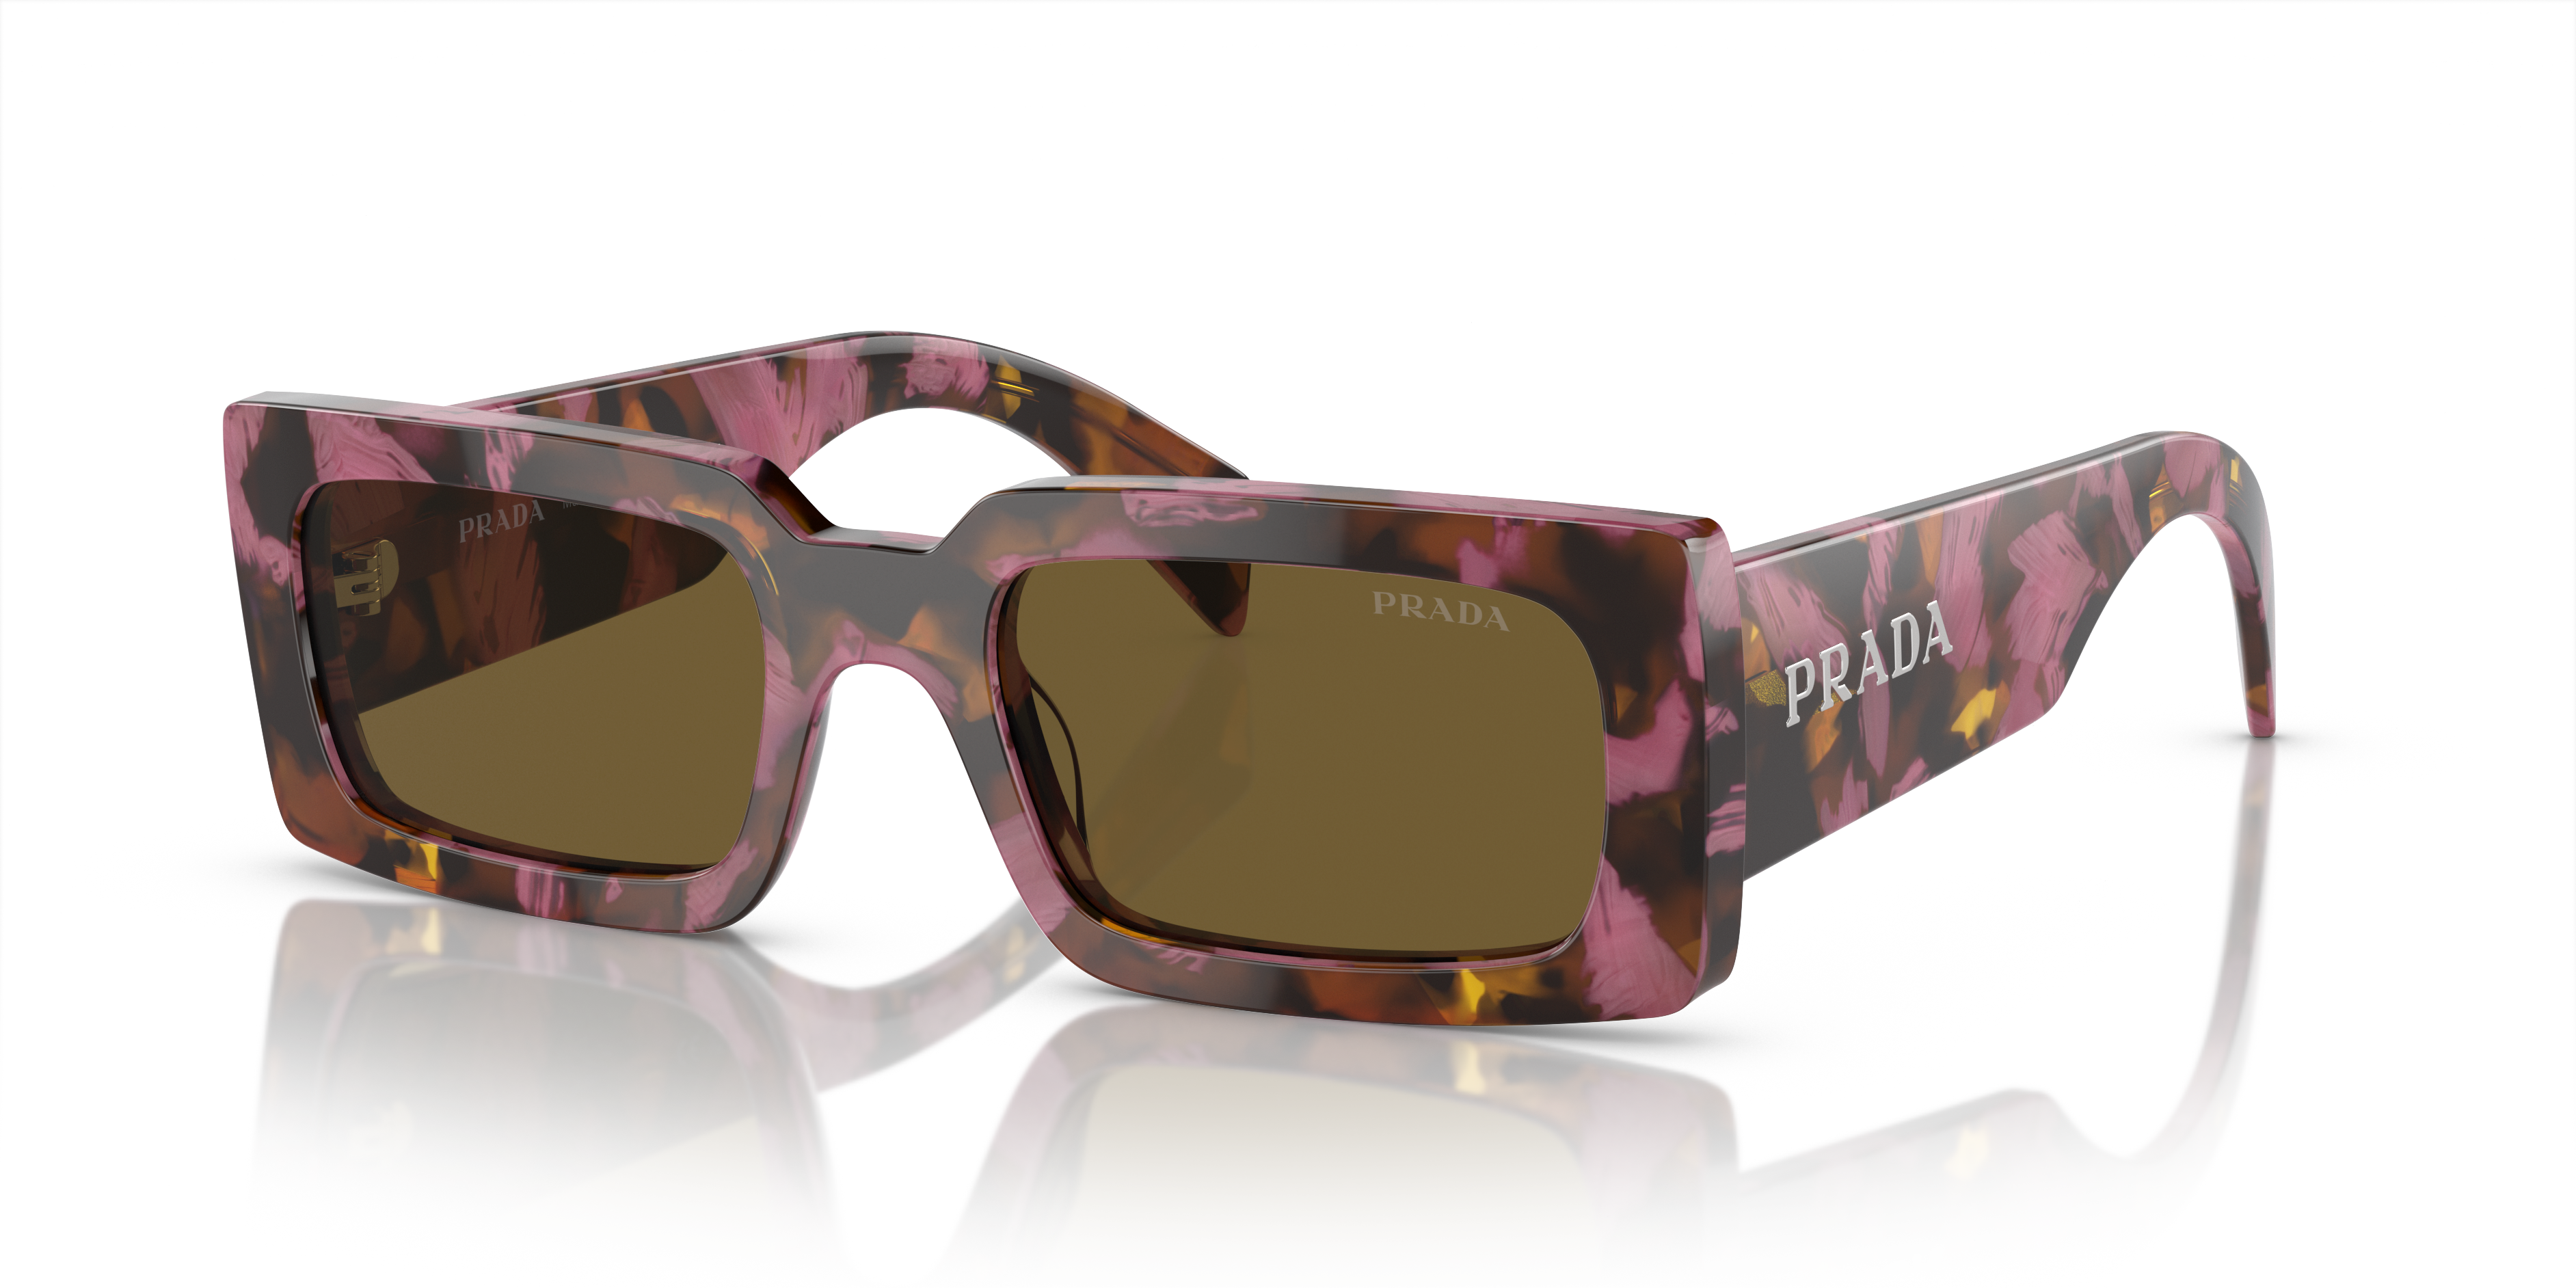 [products.image.angle_left01] Prada 0PR A07S 18N01T Solbriller